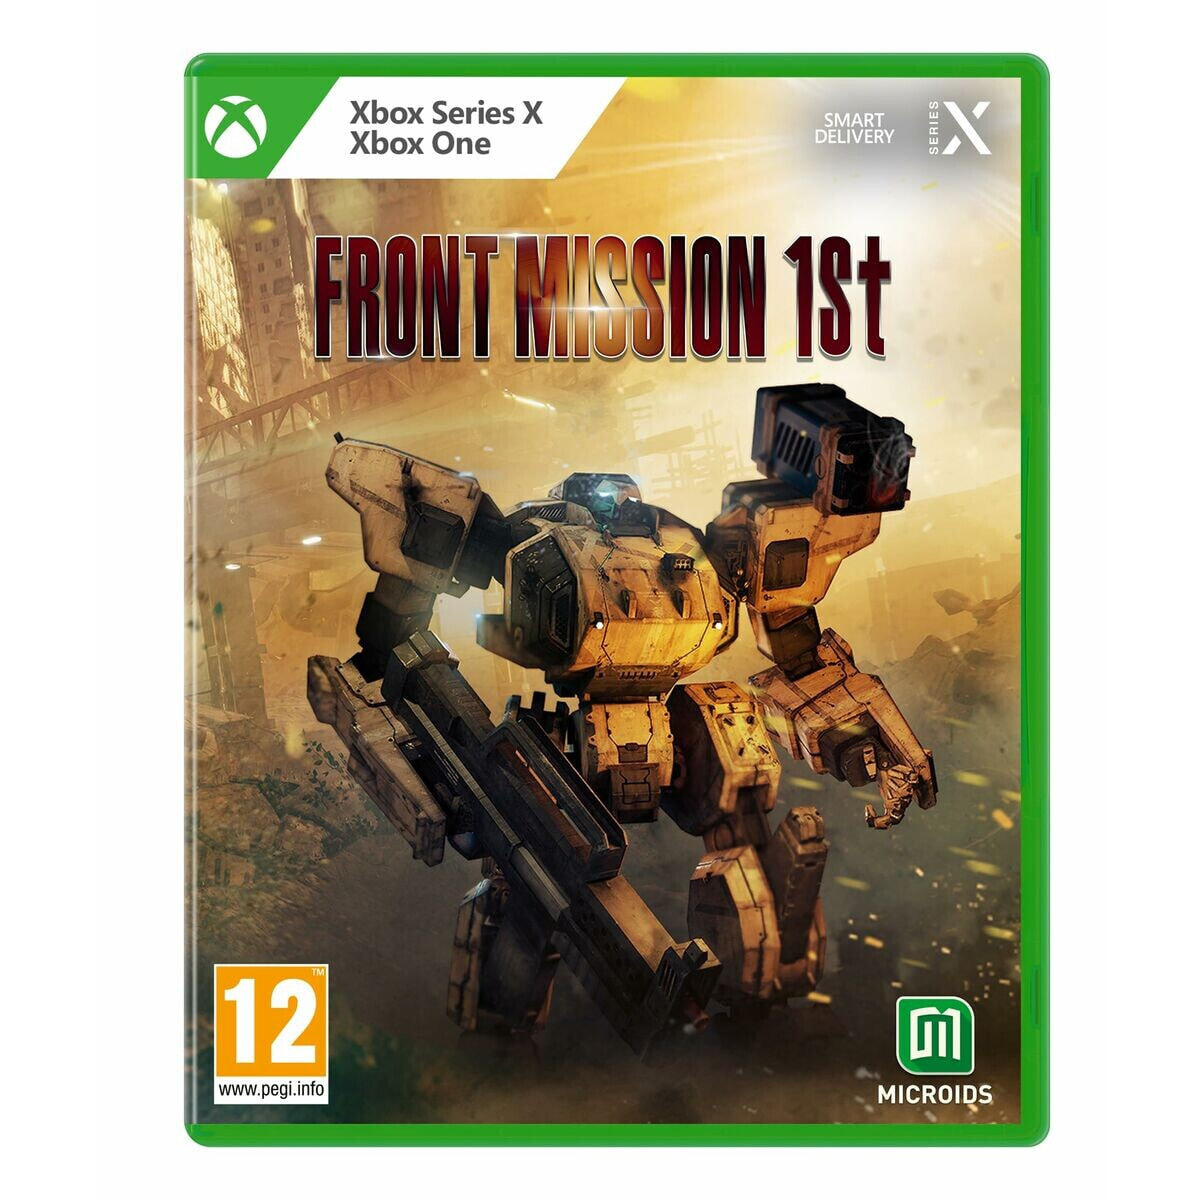 Видеоигры Xbox One / Series X Microids Front Mission 1st: Remake Limited Edition (FR)